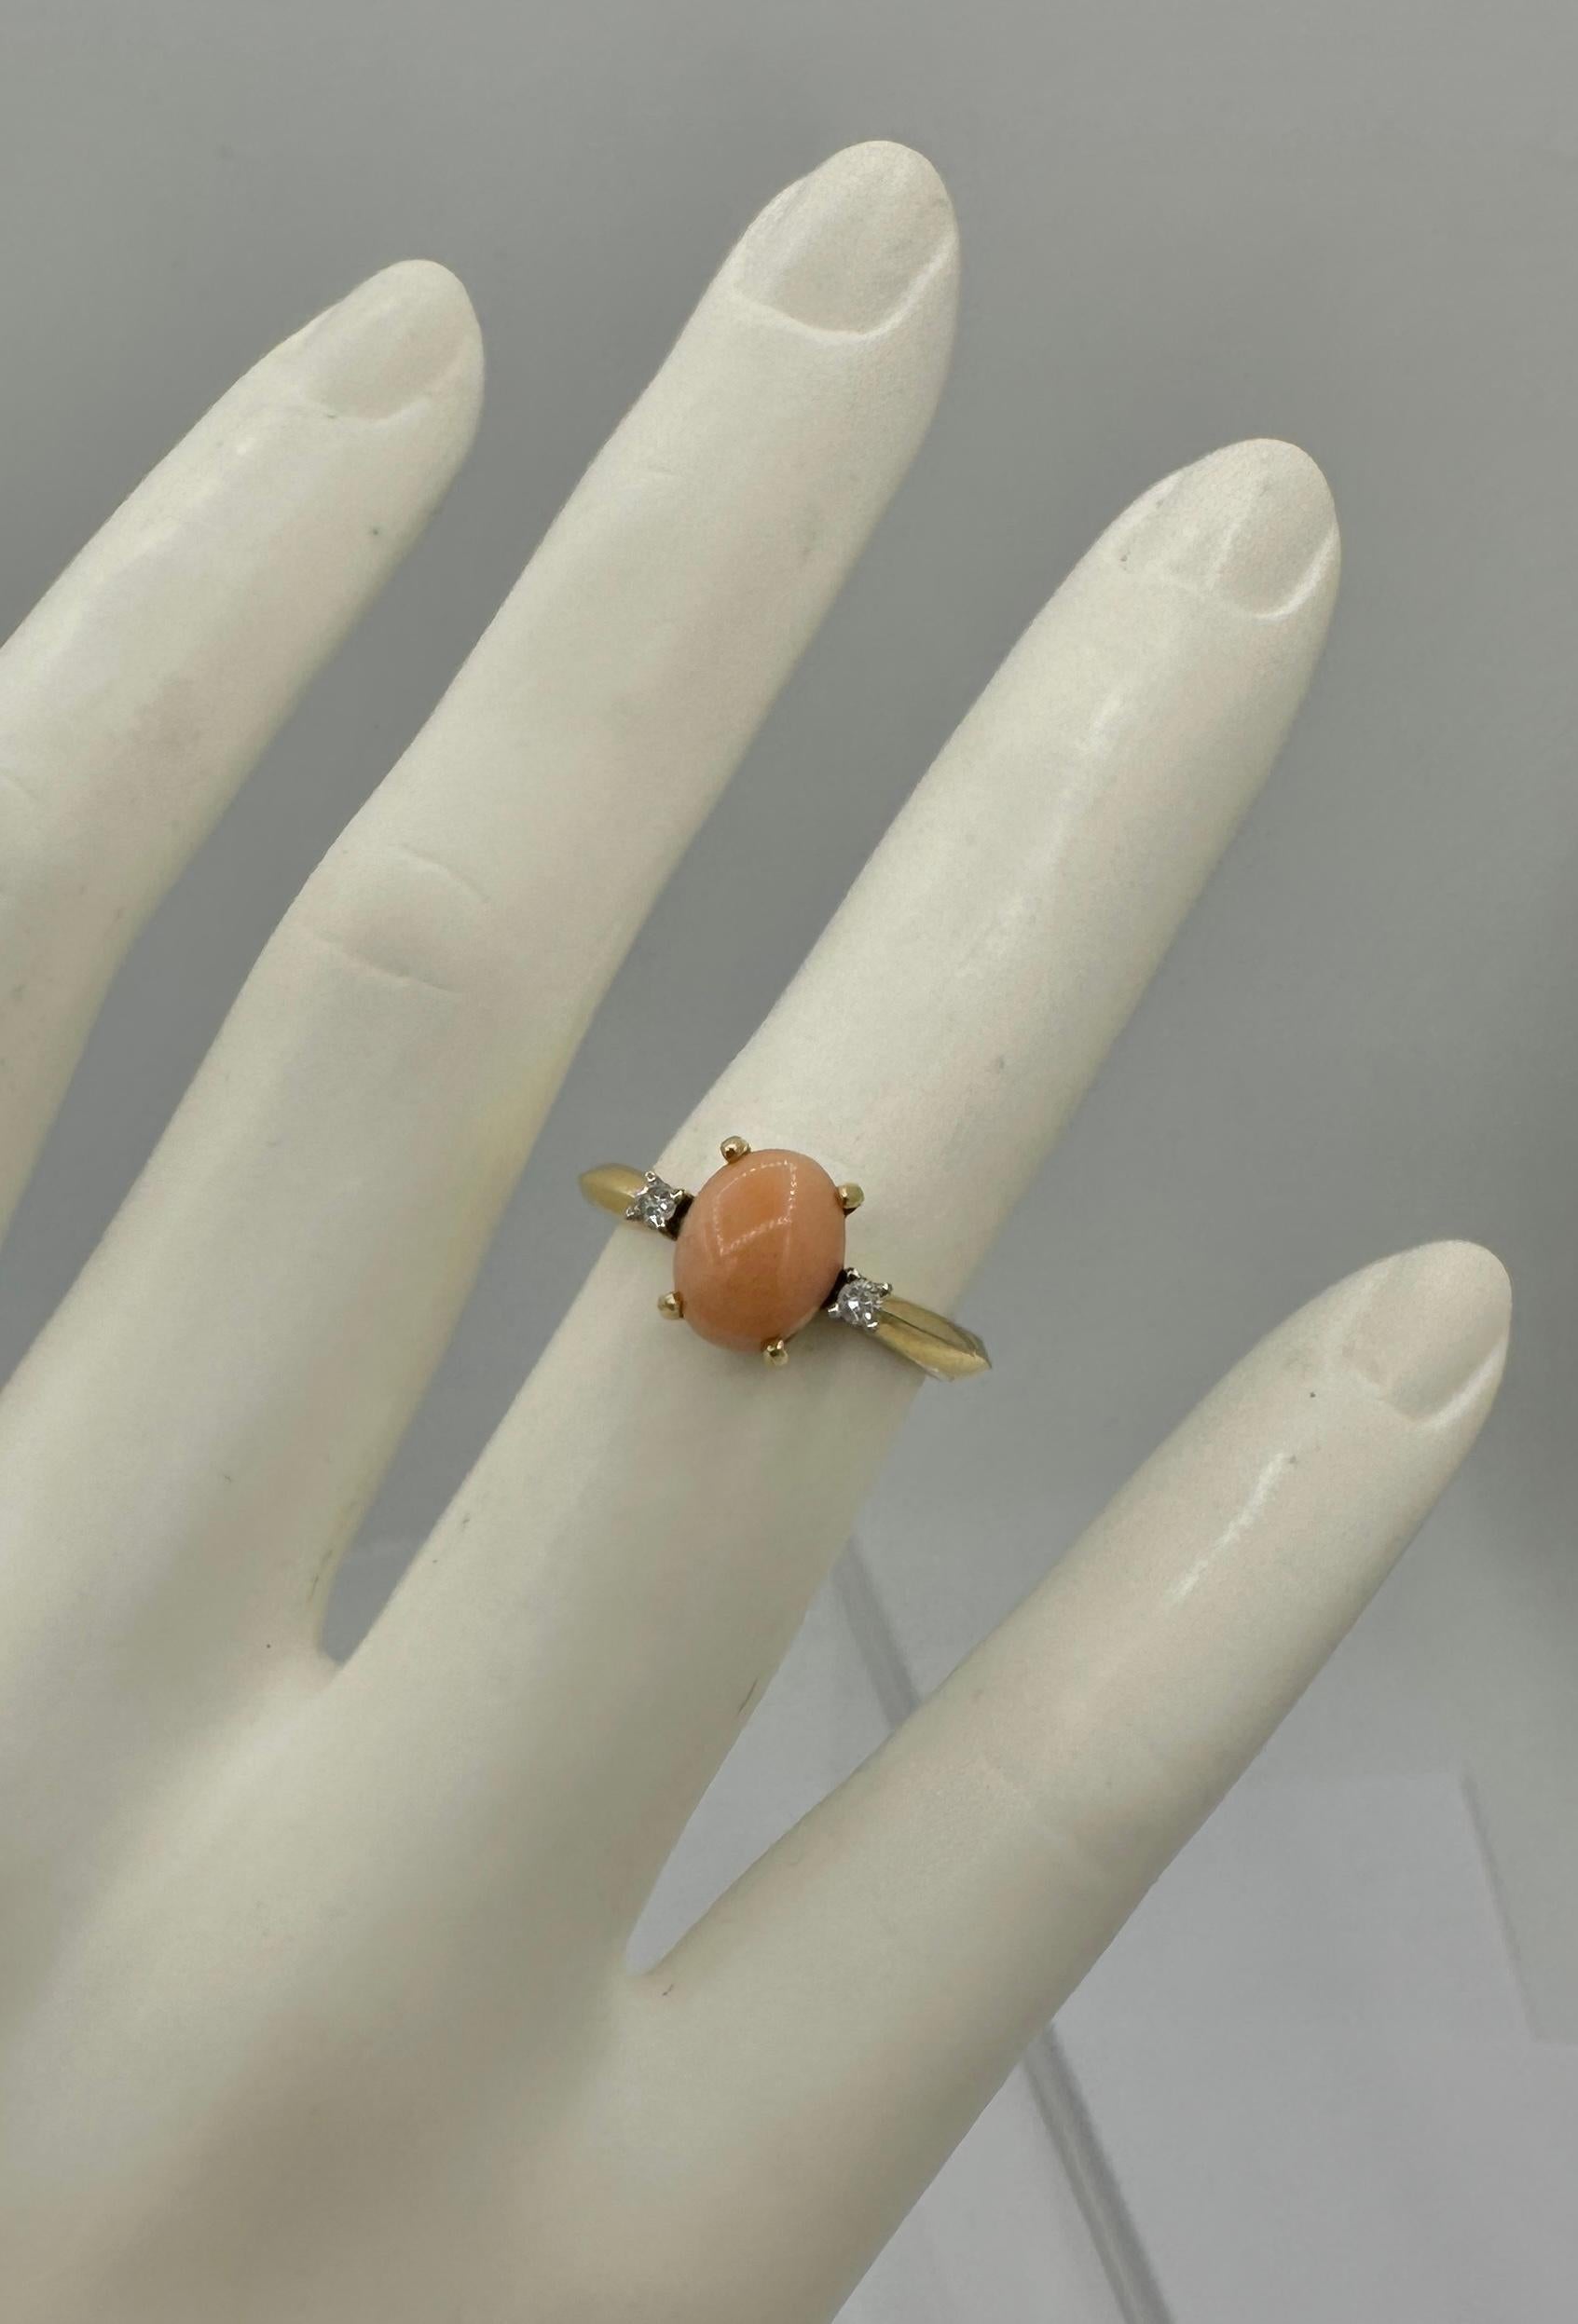 This is a wonderful Salmon Coral Diamond Ring in 14 Karat Gold.  The ring is a classic Art Deco design with its wonderful colors and style.  The ring features a natural oval Salmon Coral cabochon of 9mm in length.  On either side of the coral are